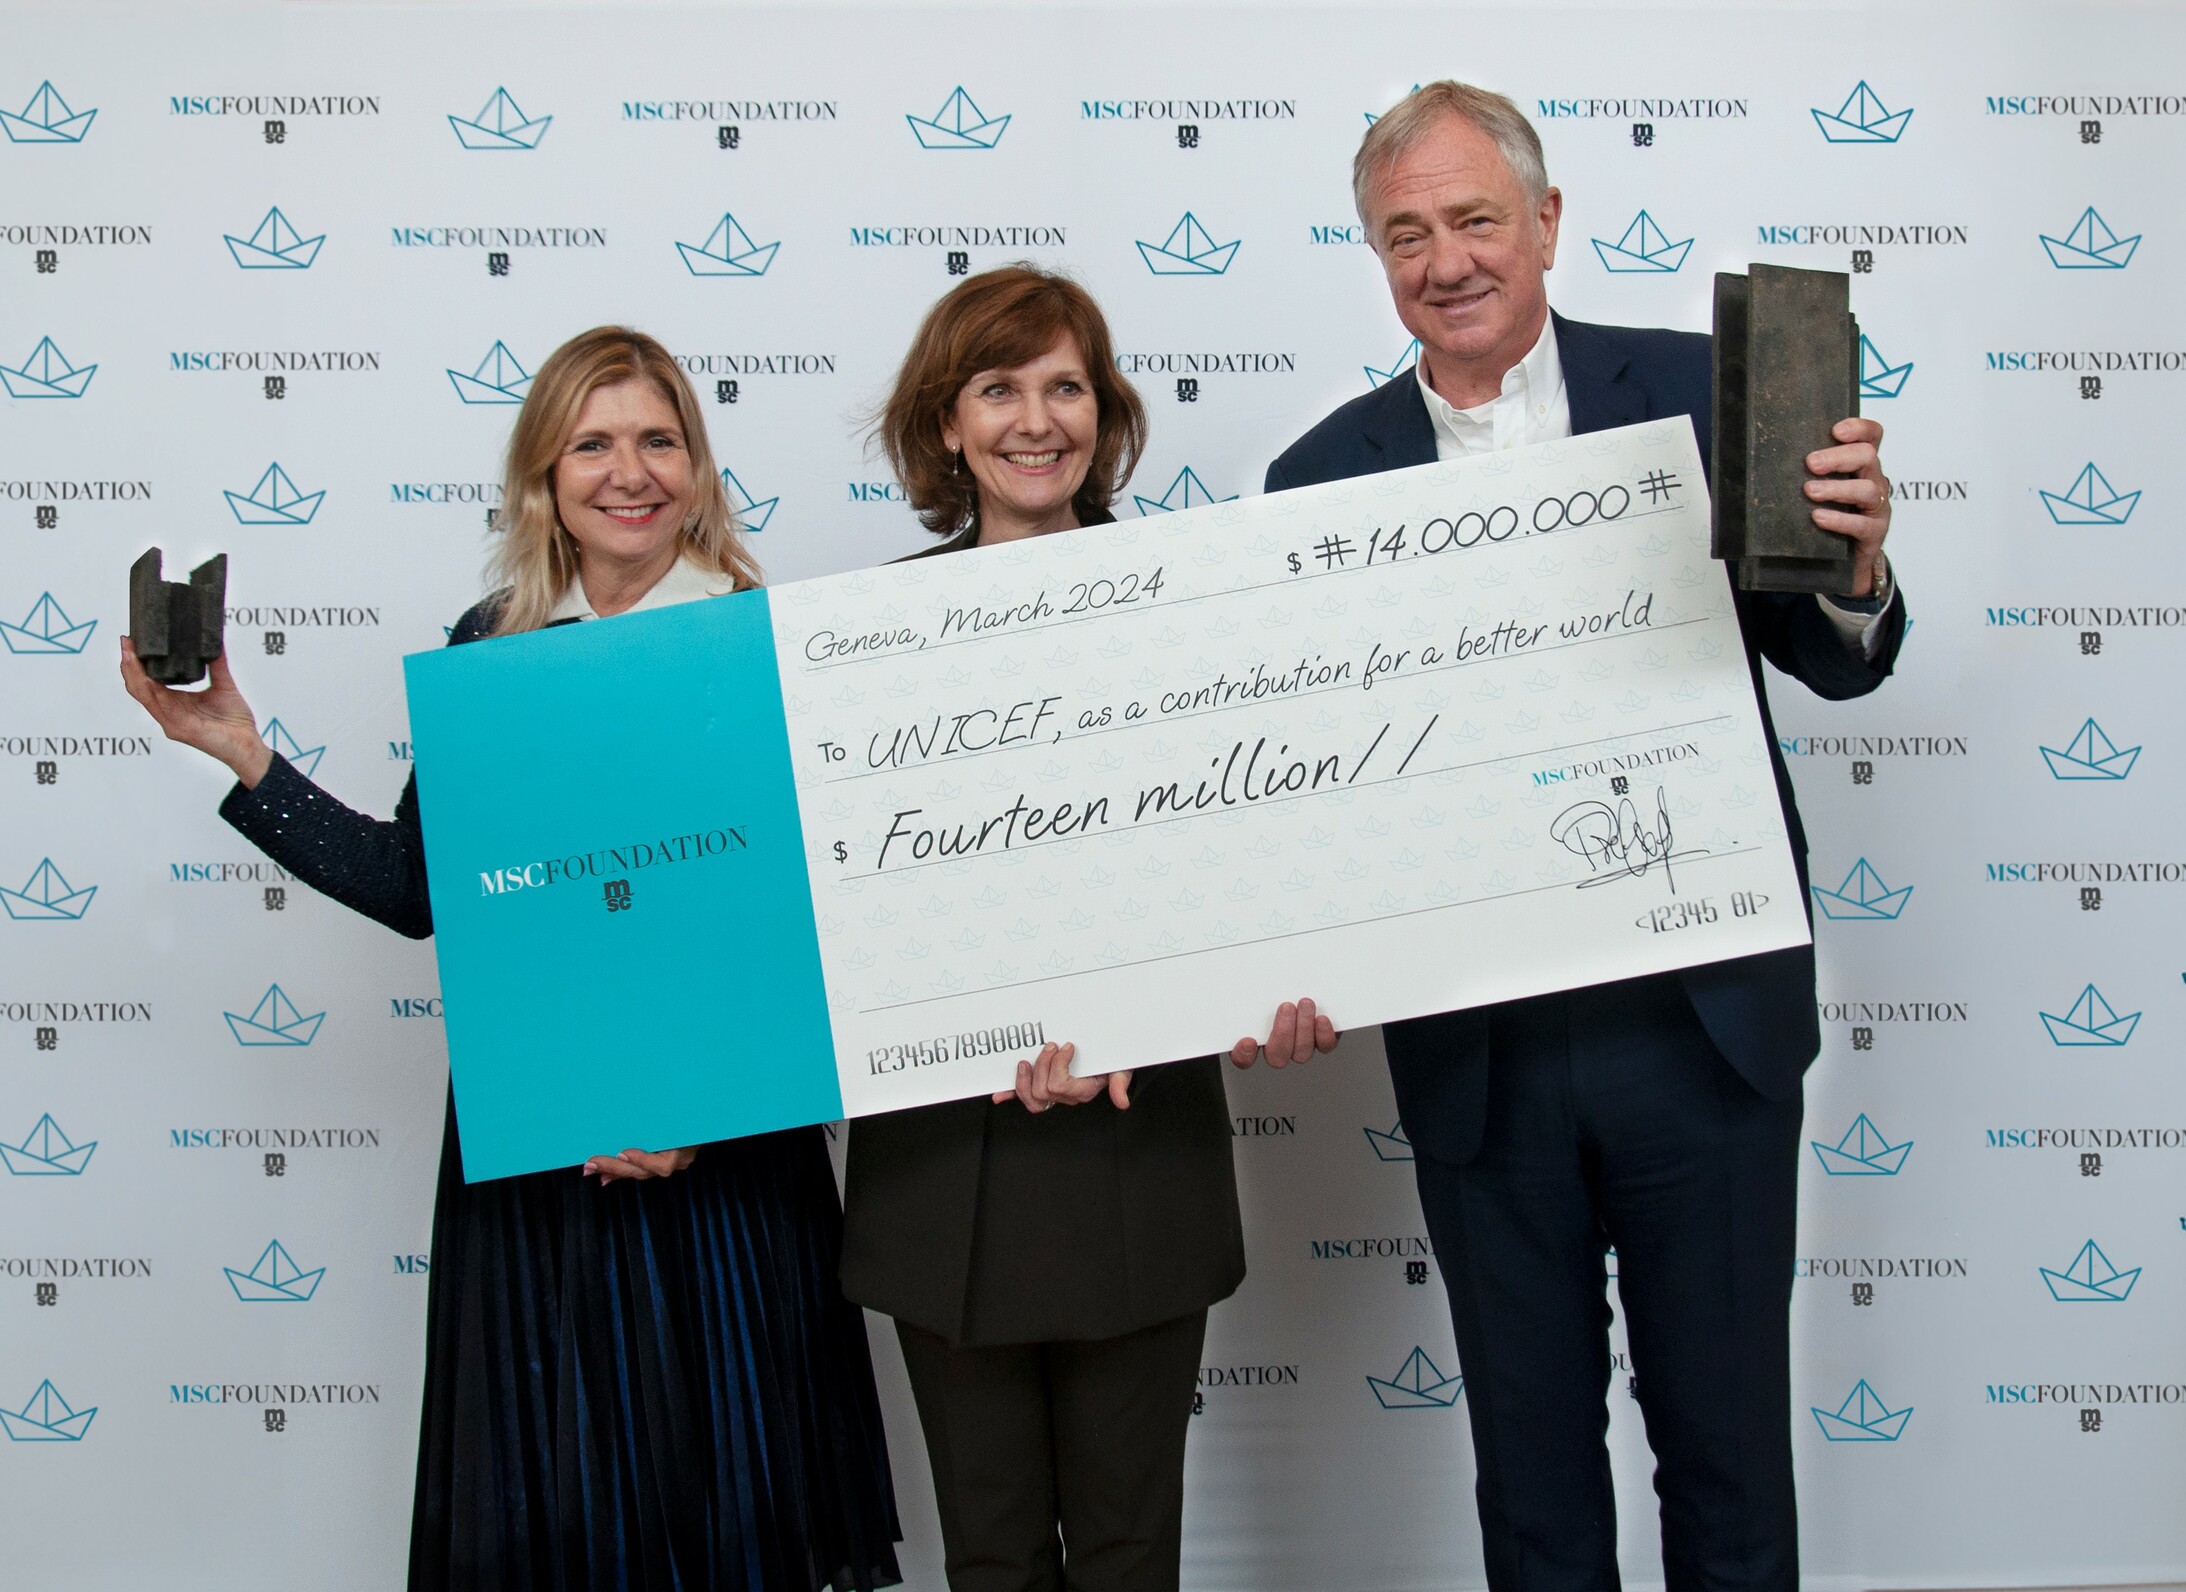 MSC Foundation gives check to UNICEF